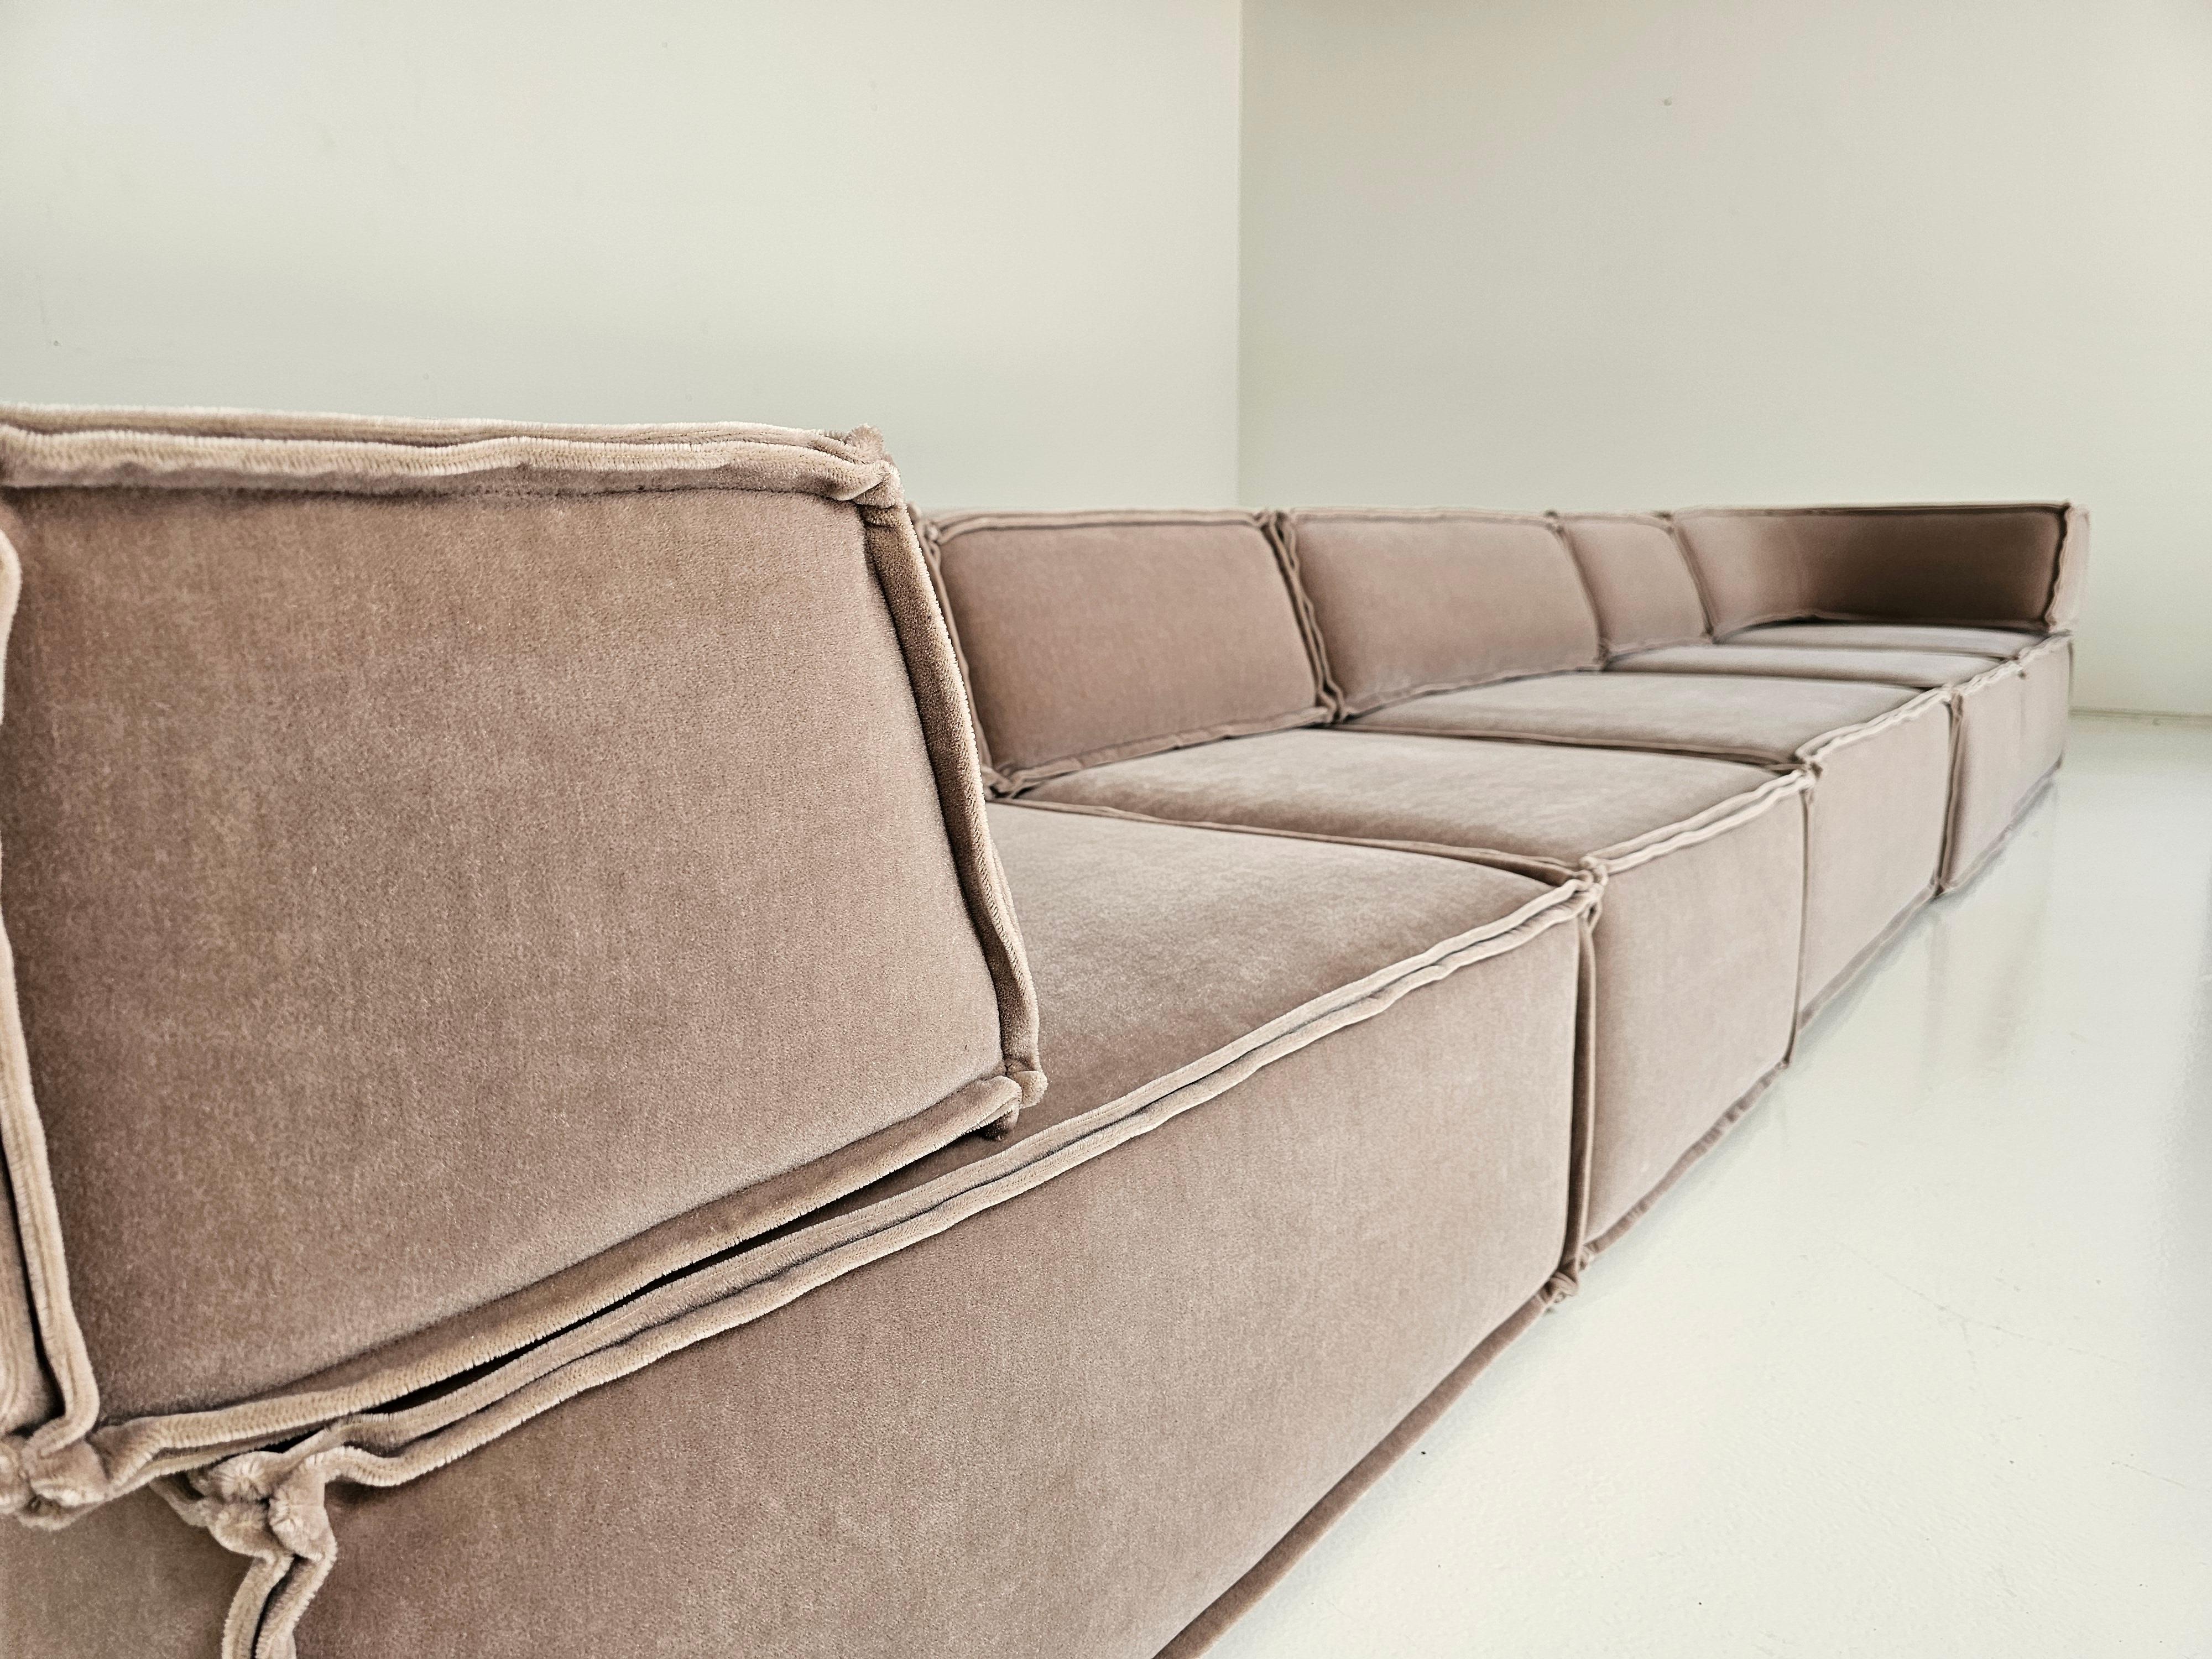 Mohair COR Trio Sofa in beige mohair by Team Form Ag for COR Furniture, Germany, 1970s For Sale